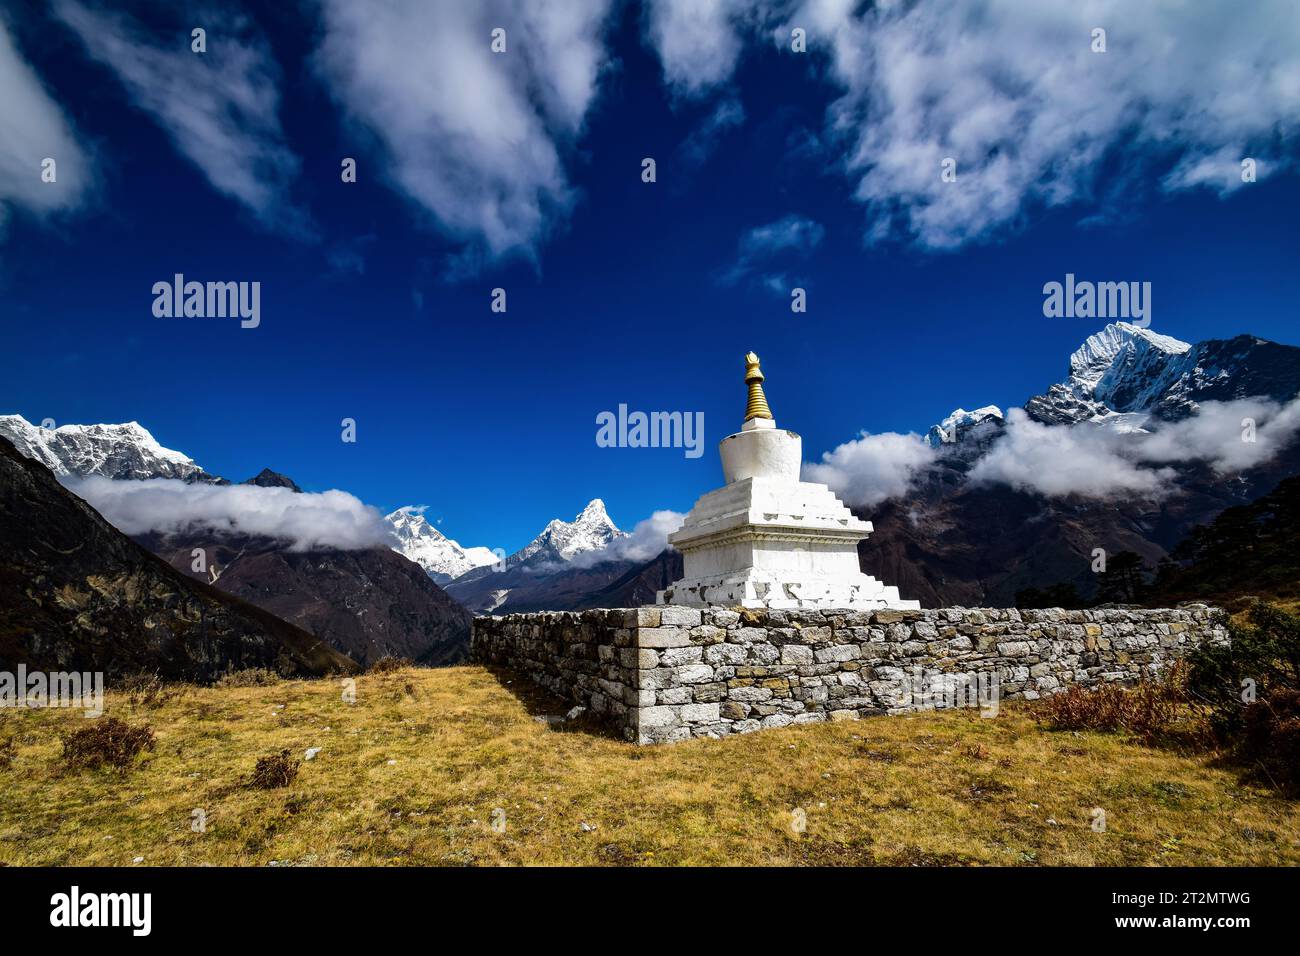 Chorten with Ama Dablam and Mount Everest in the background Stock Photo